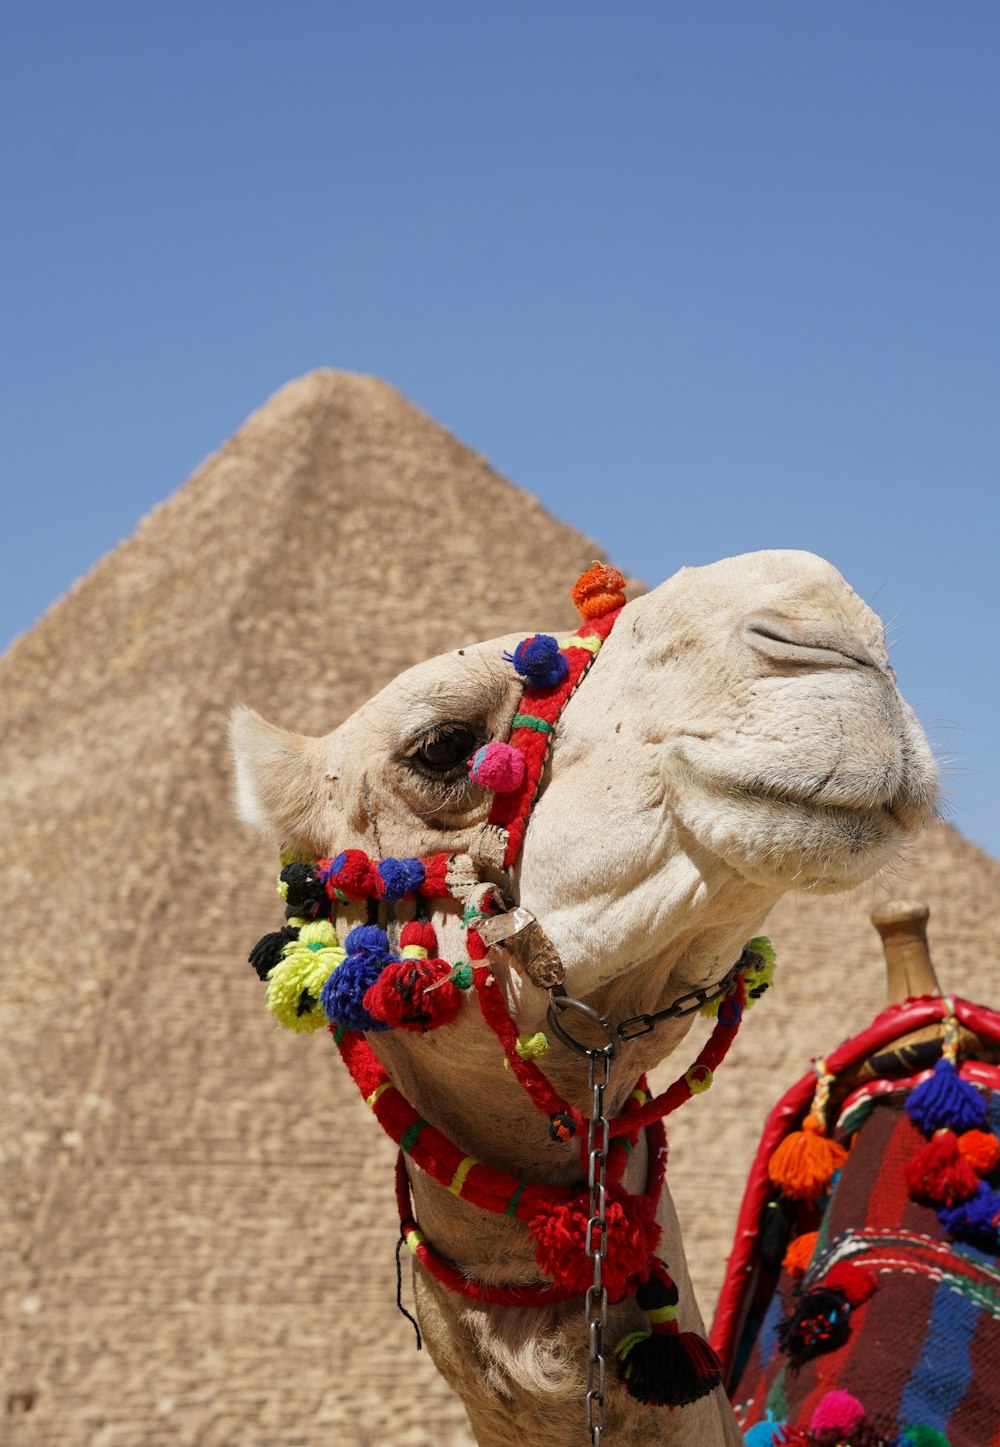 a camel with a saddle in front of a pyramid